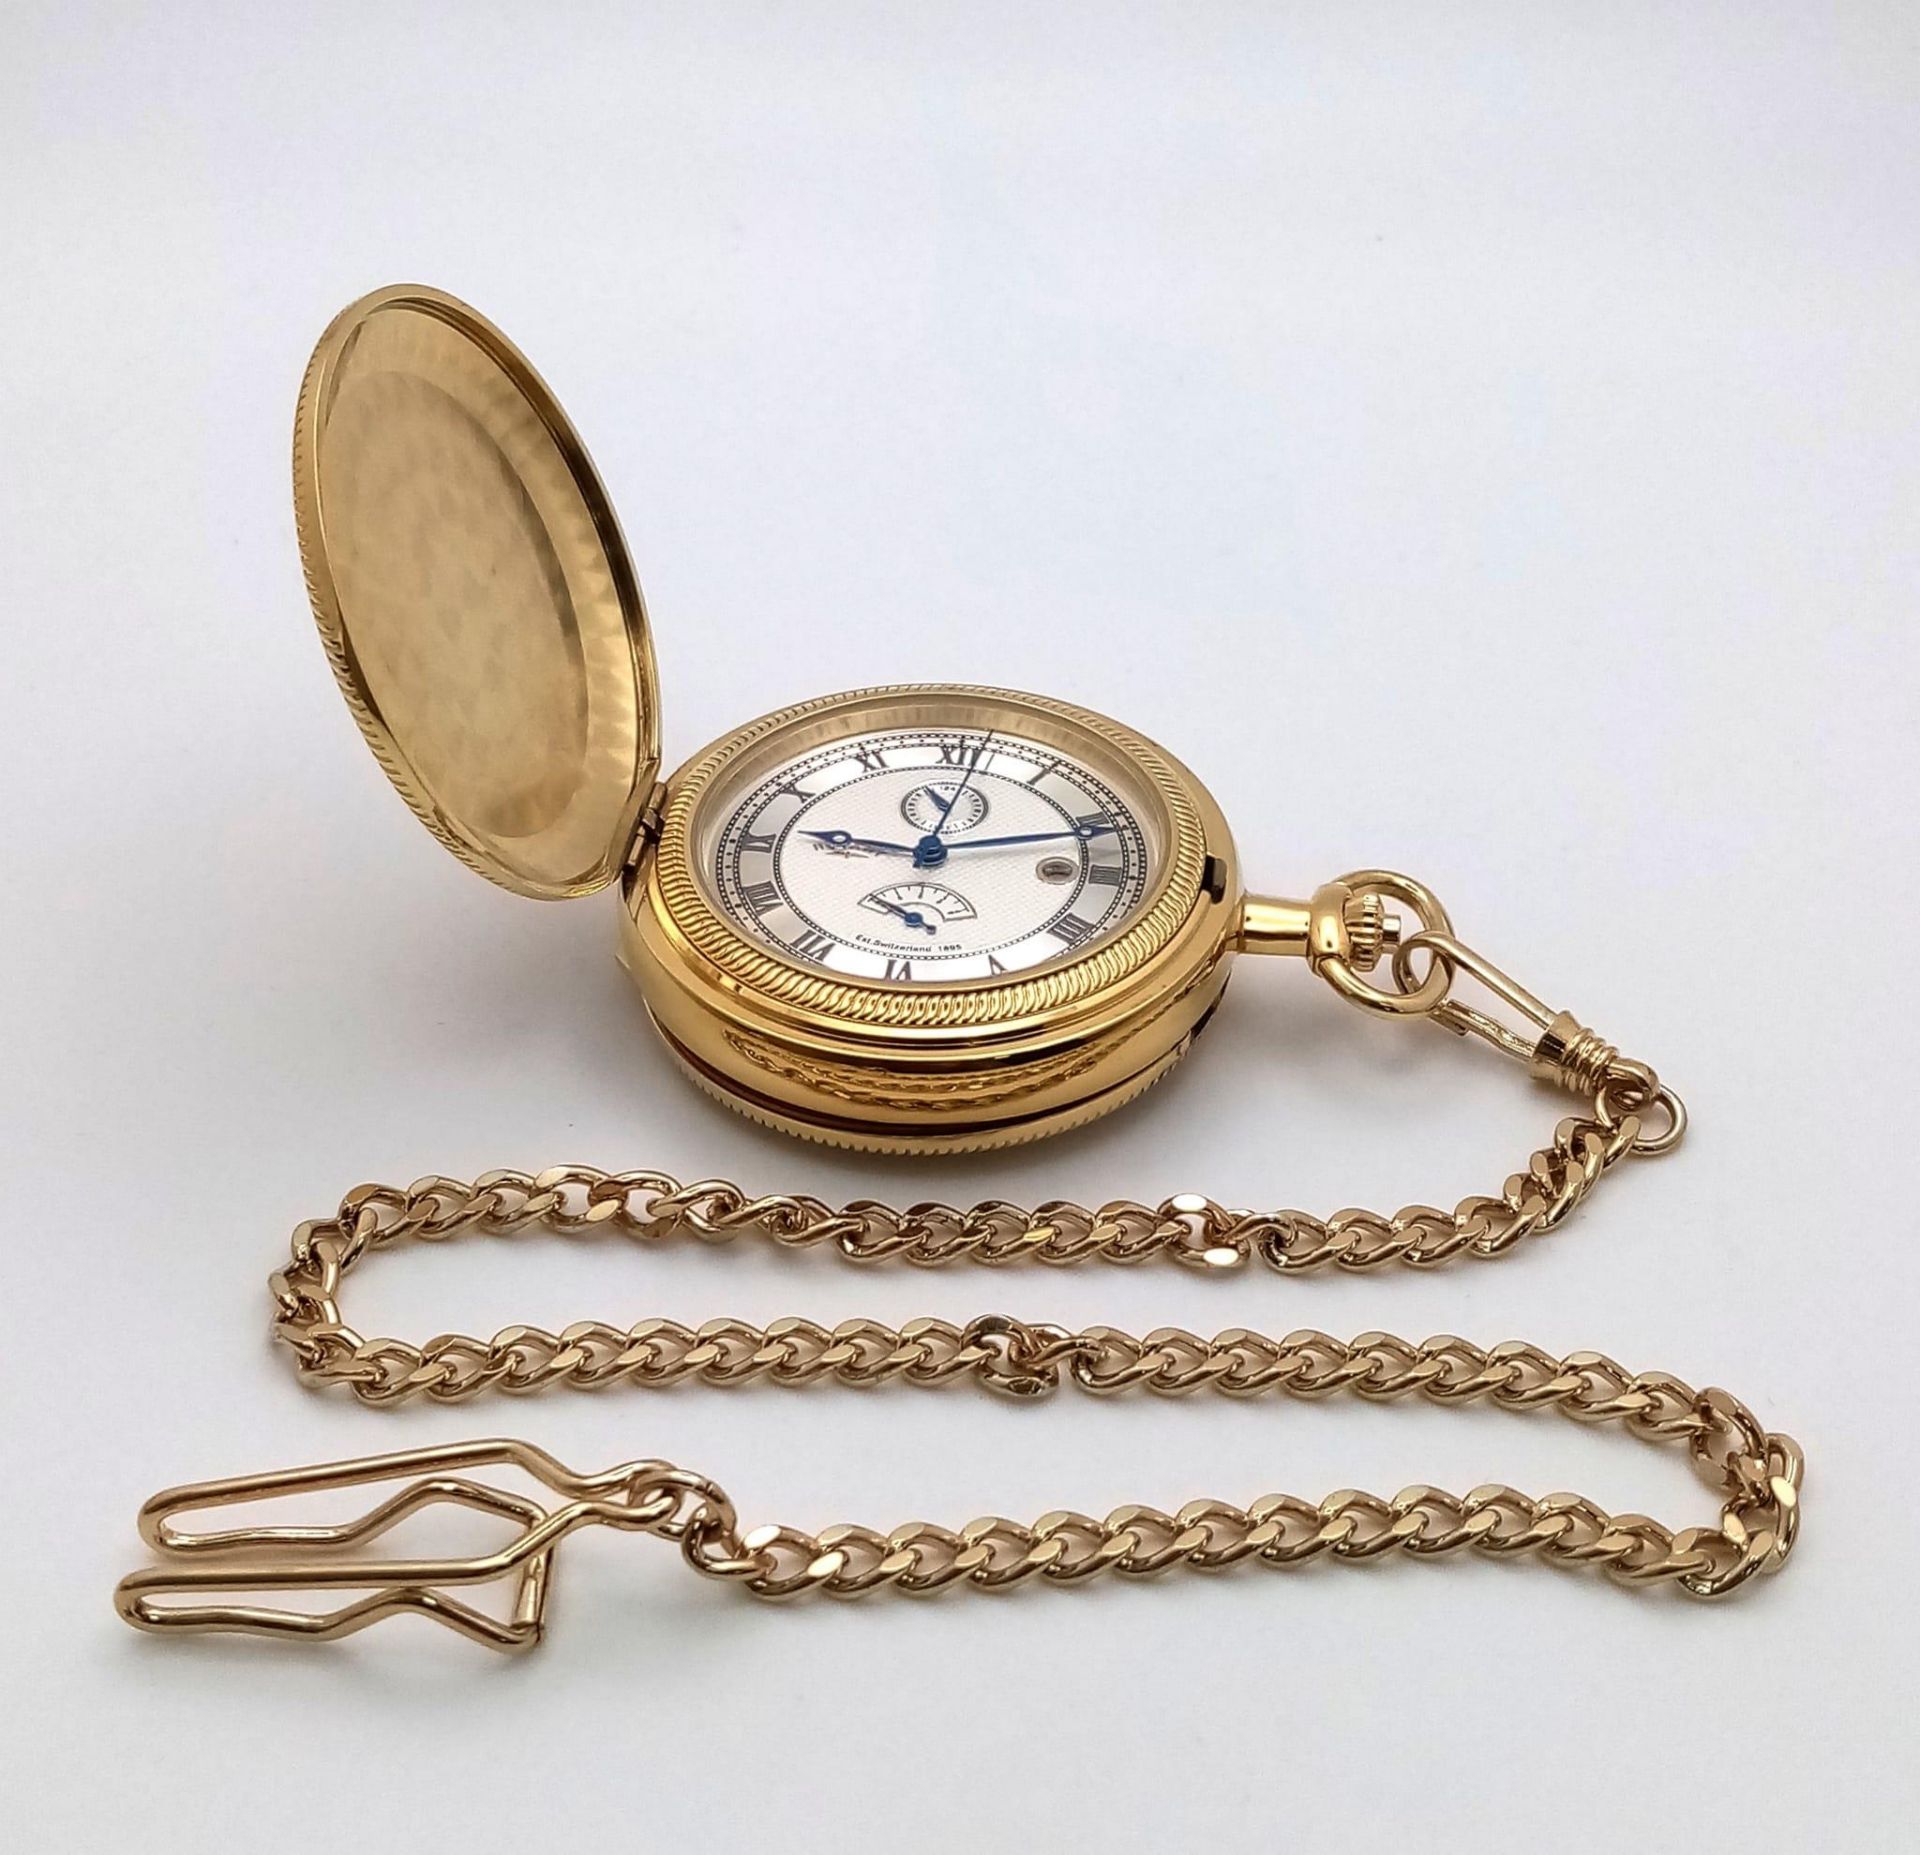 An Unworn Gold Plated Rotary Manual Wind Pocket, Date Watch. 4 Day Power Reserve. With Albert Chain. - Image 4 of 8